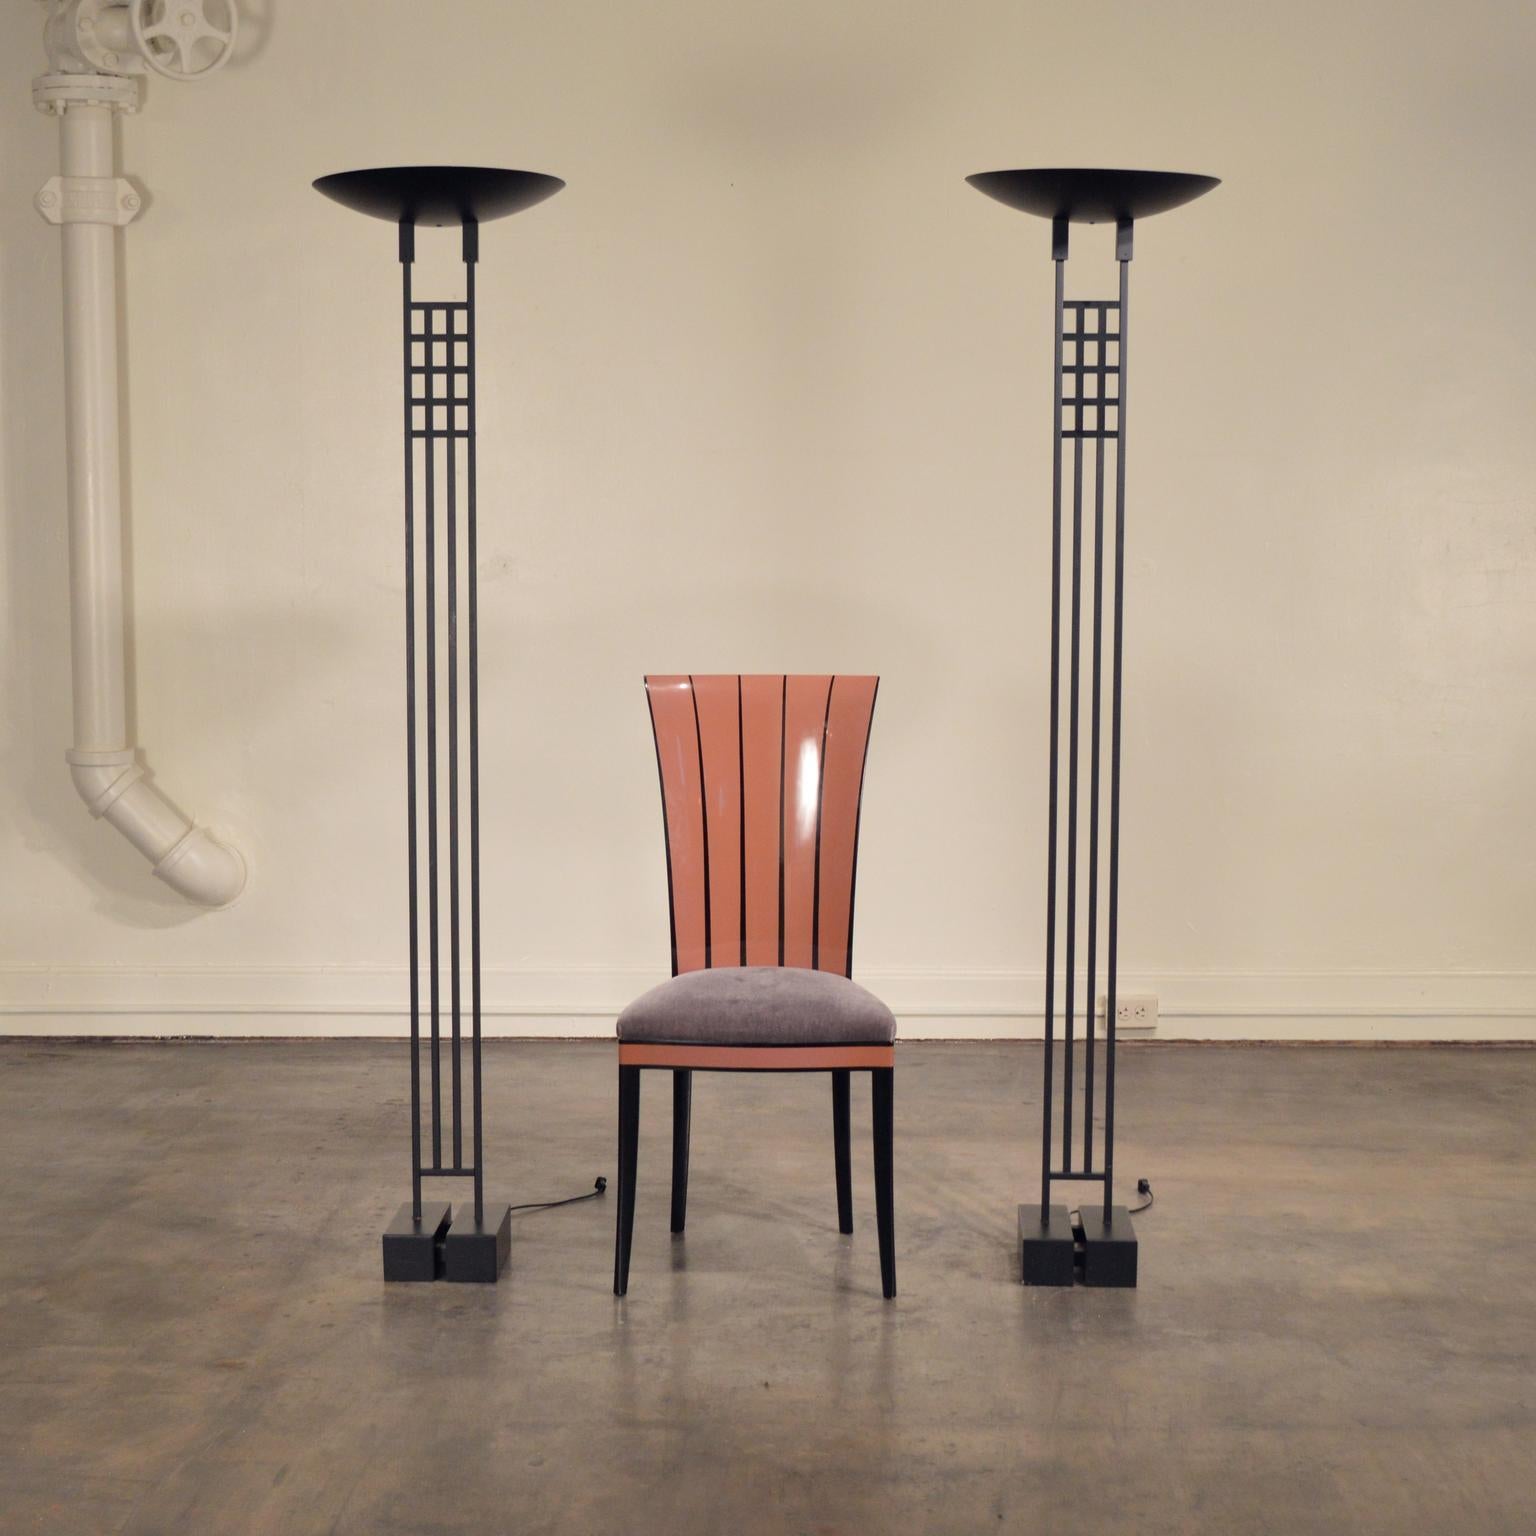 Late 20th Century Pair Black Post-Modern Torchiere Lamps by Robert Sonneman for Kovacs, 1980's For Sale